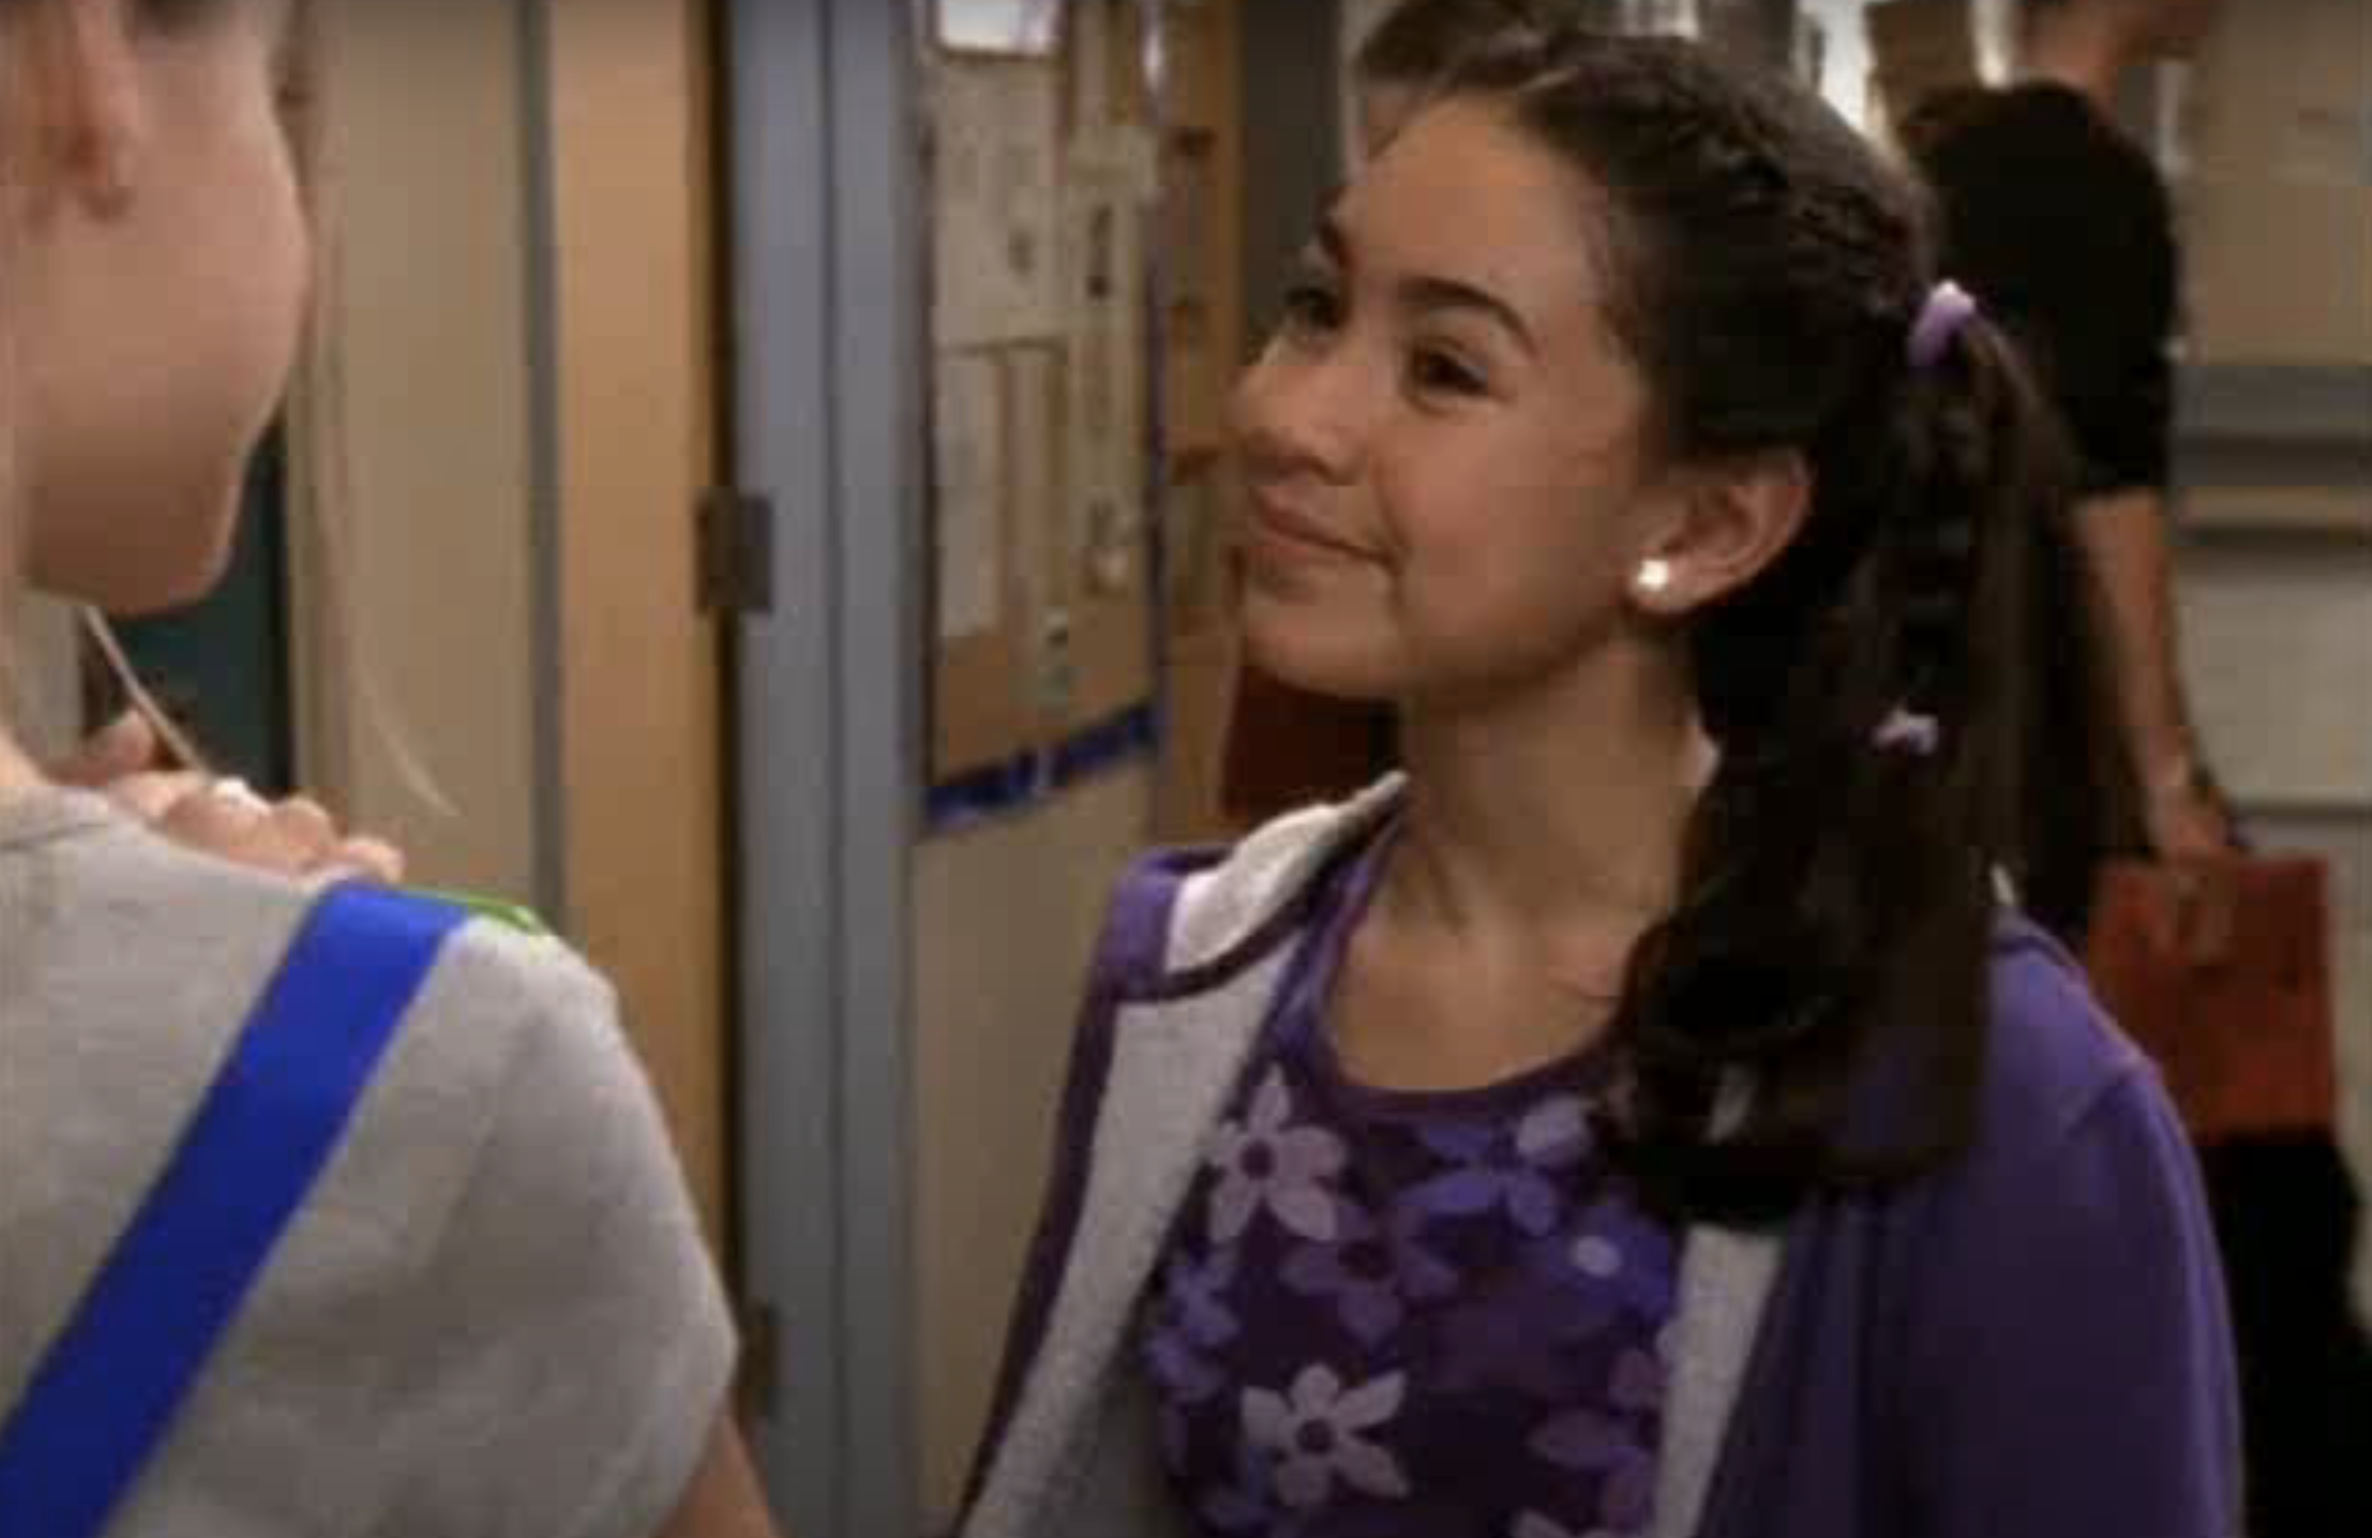 Two characters from a TV show are standing in a school hallway, one facing the camera and the other with a side profile